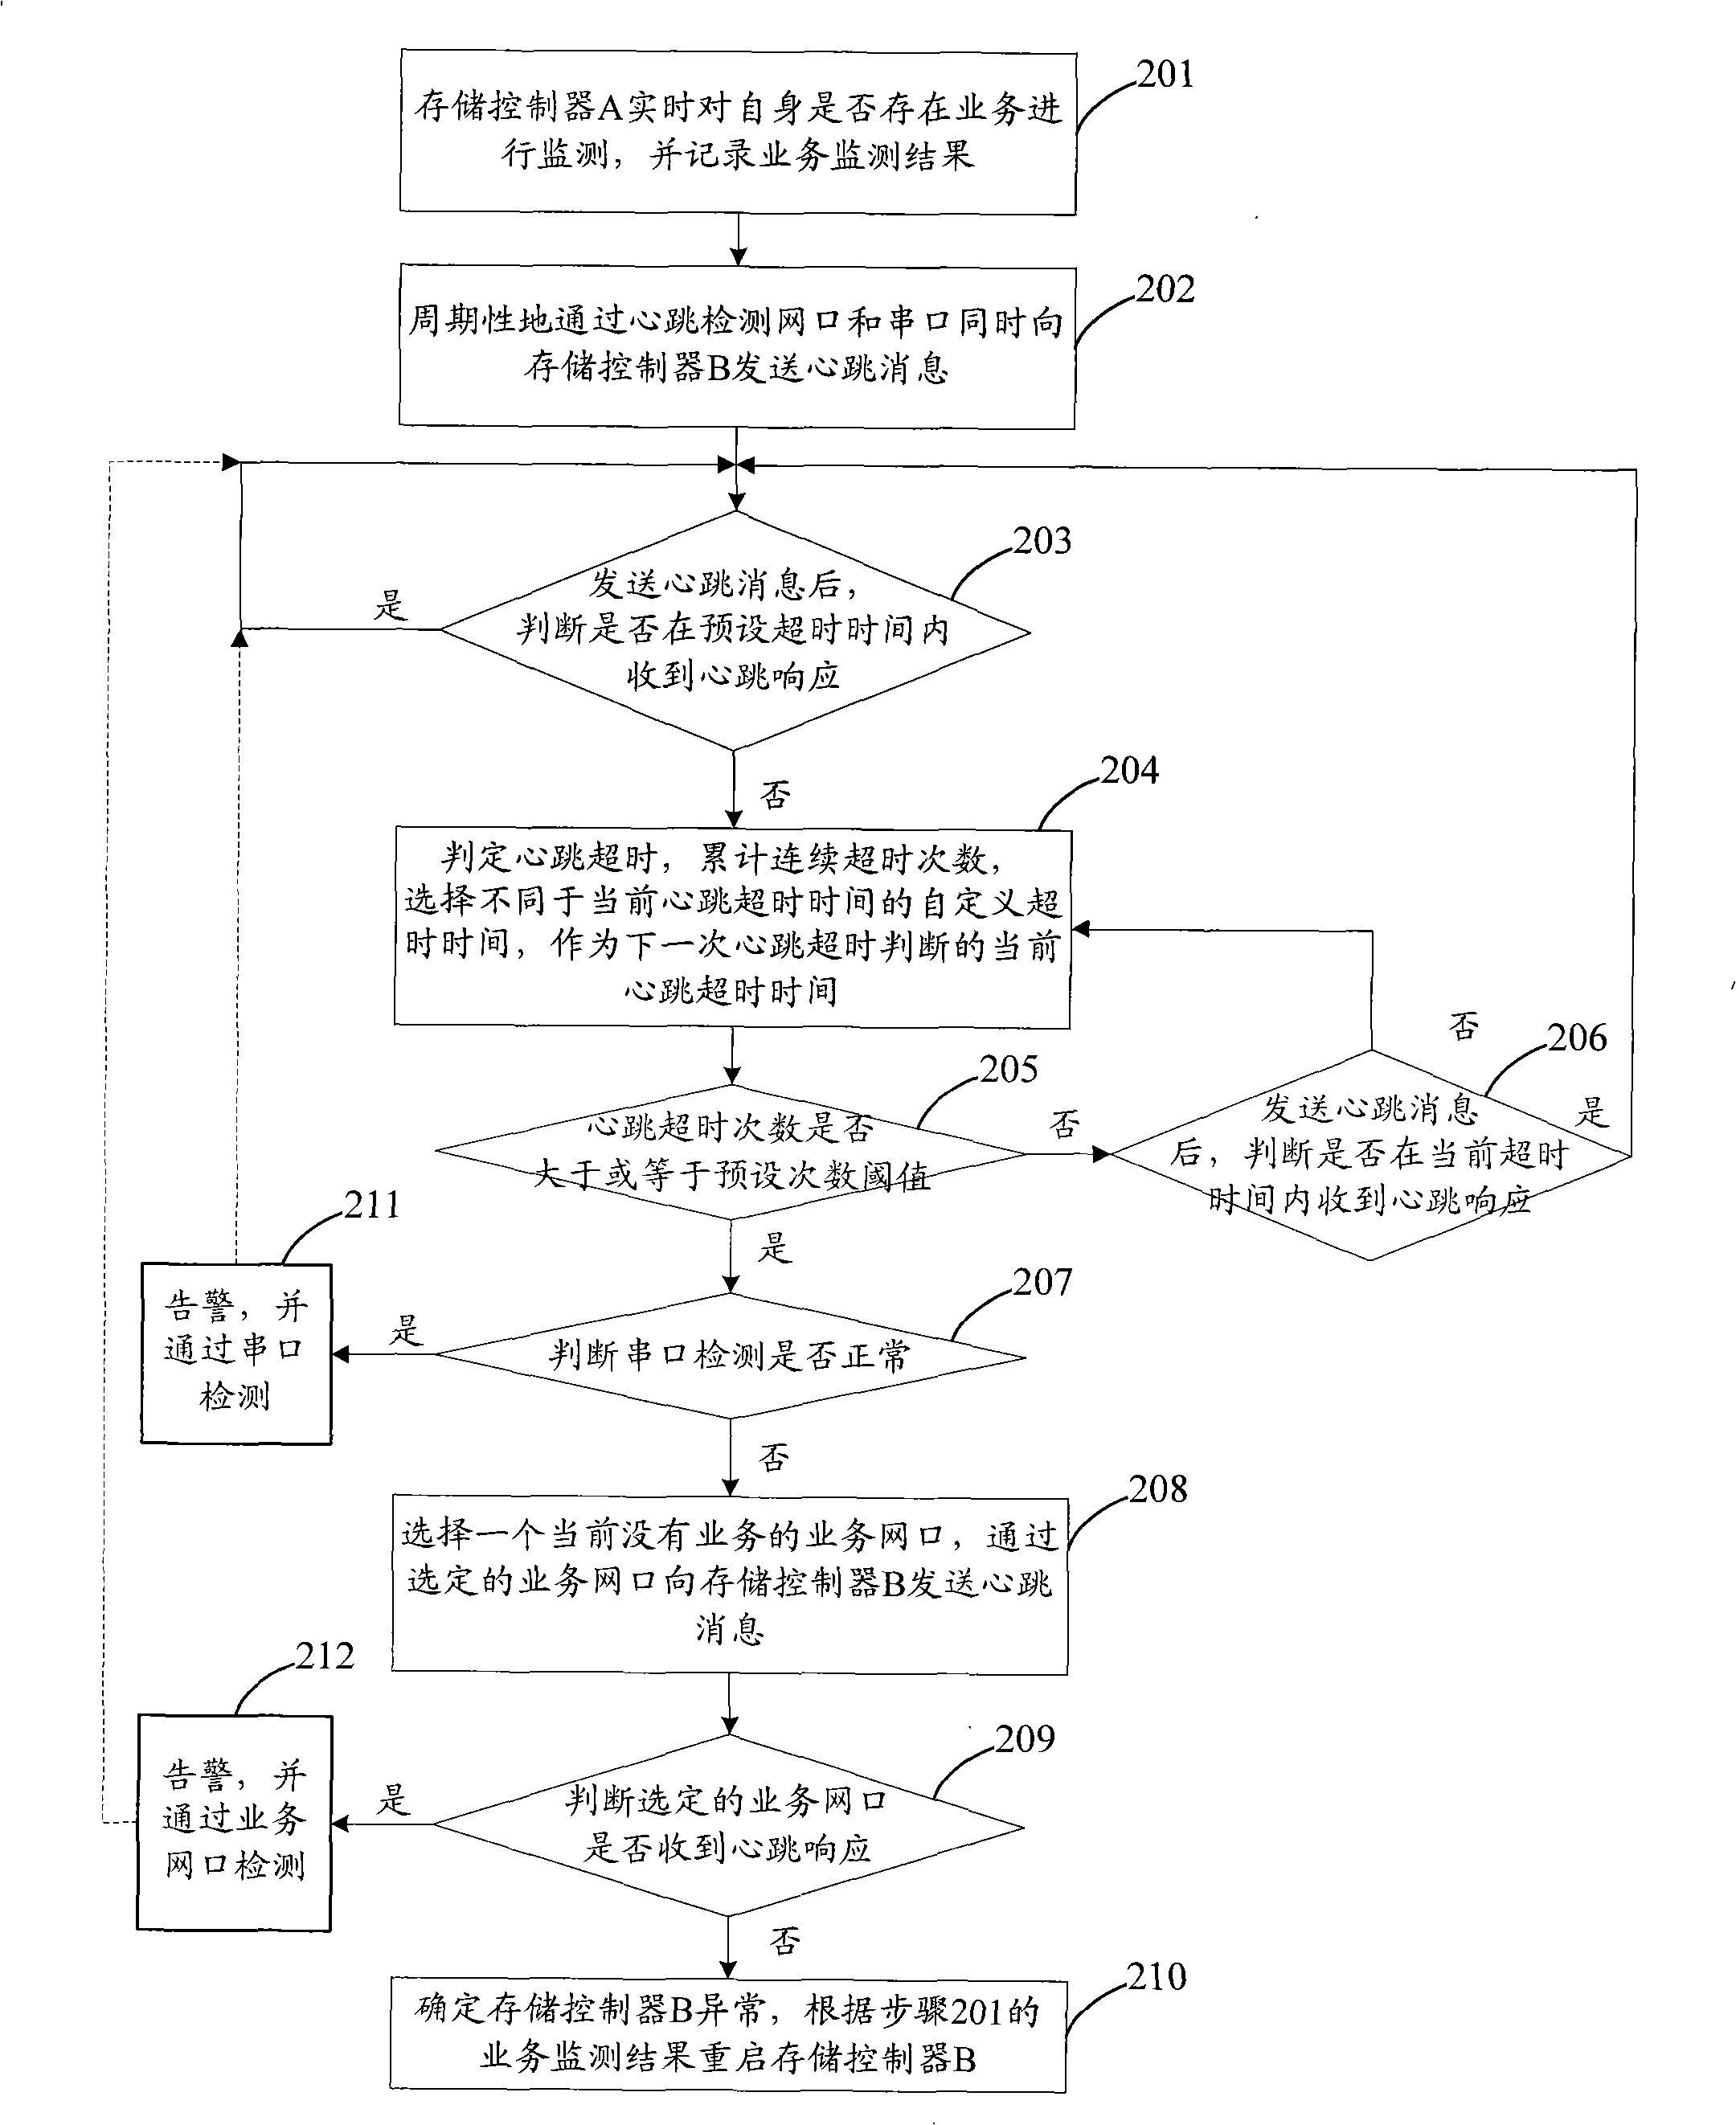 Heartbeat detection method and heartbeat detection apparatus